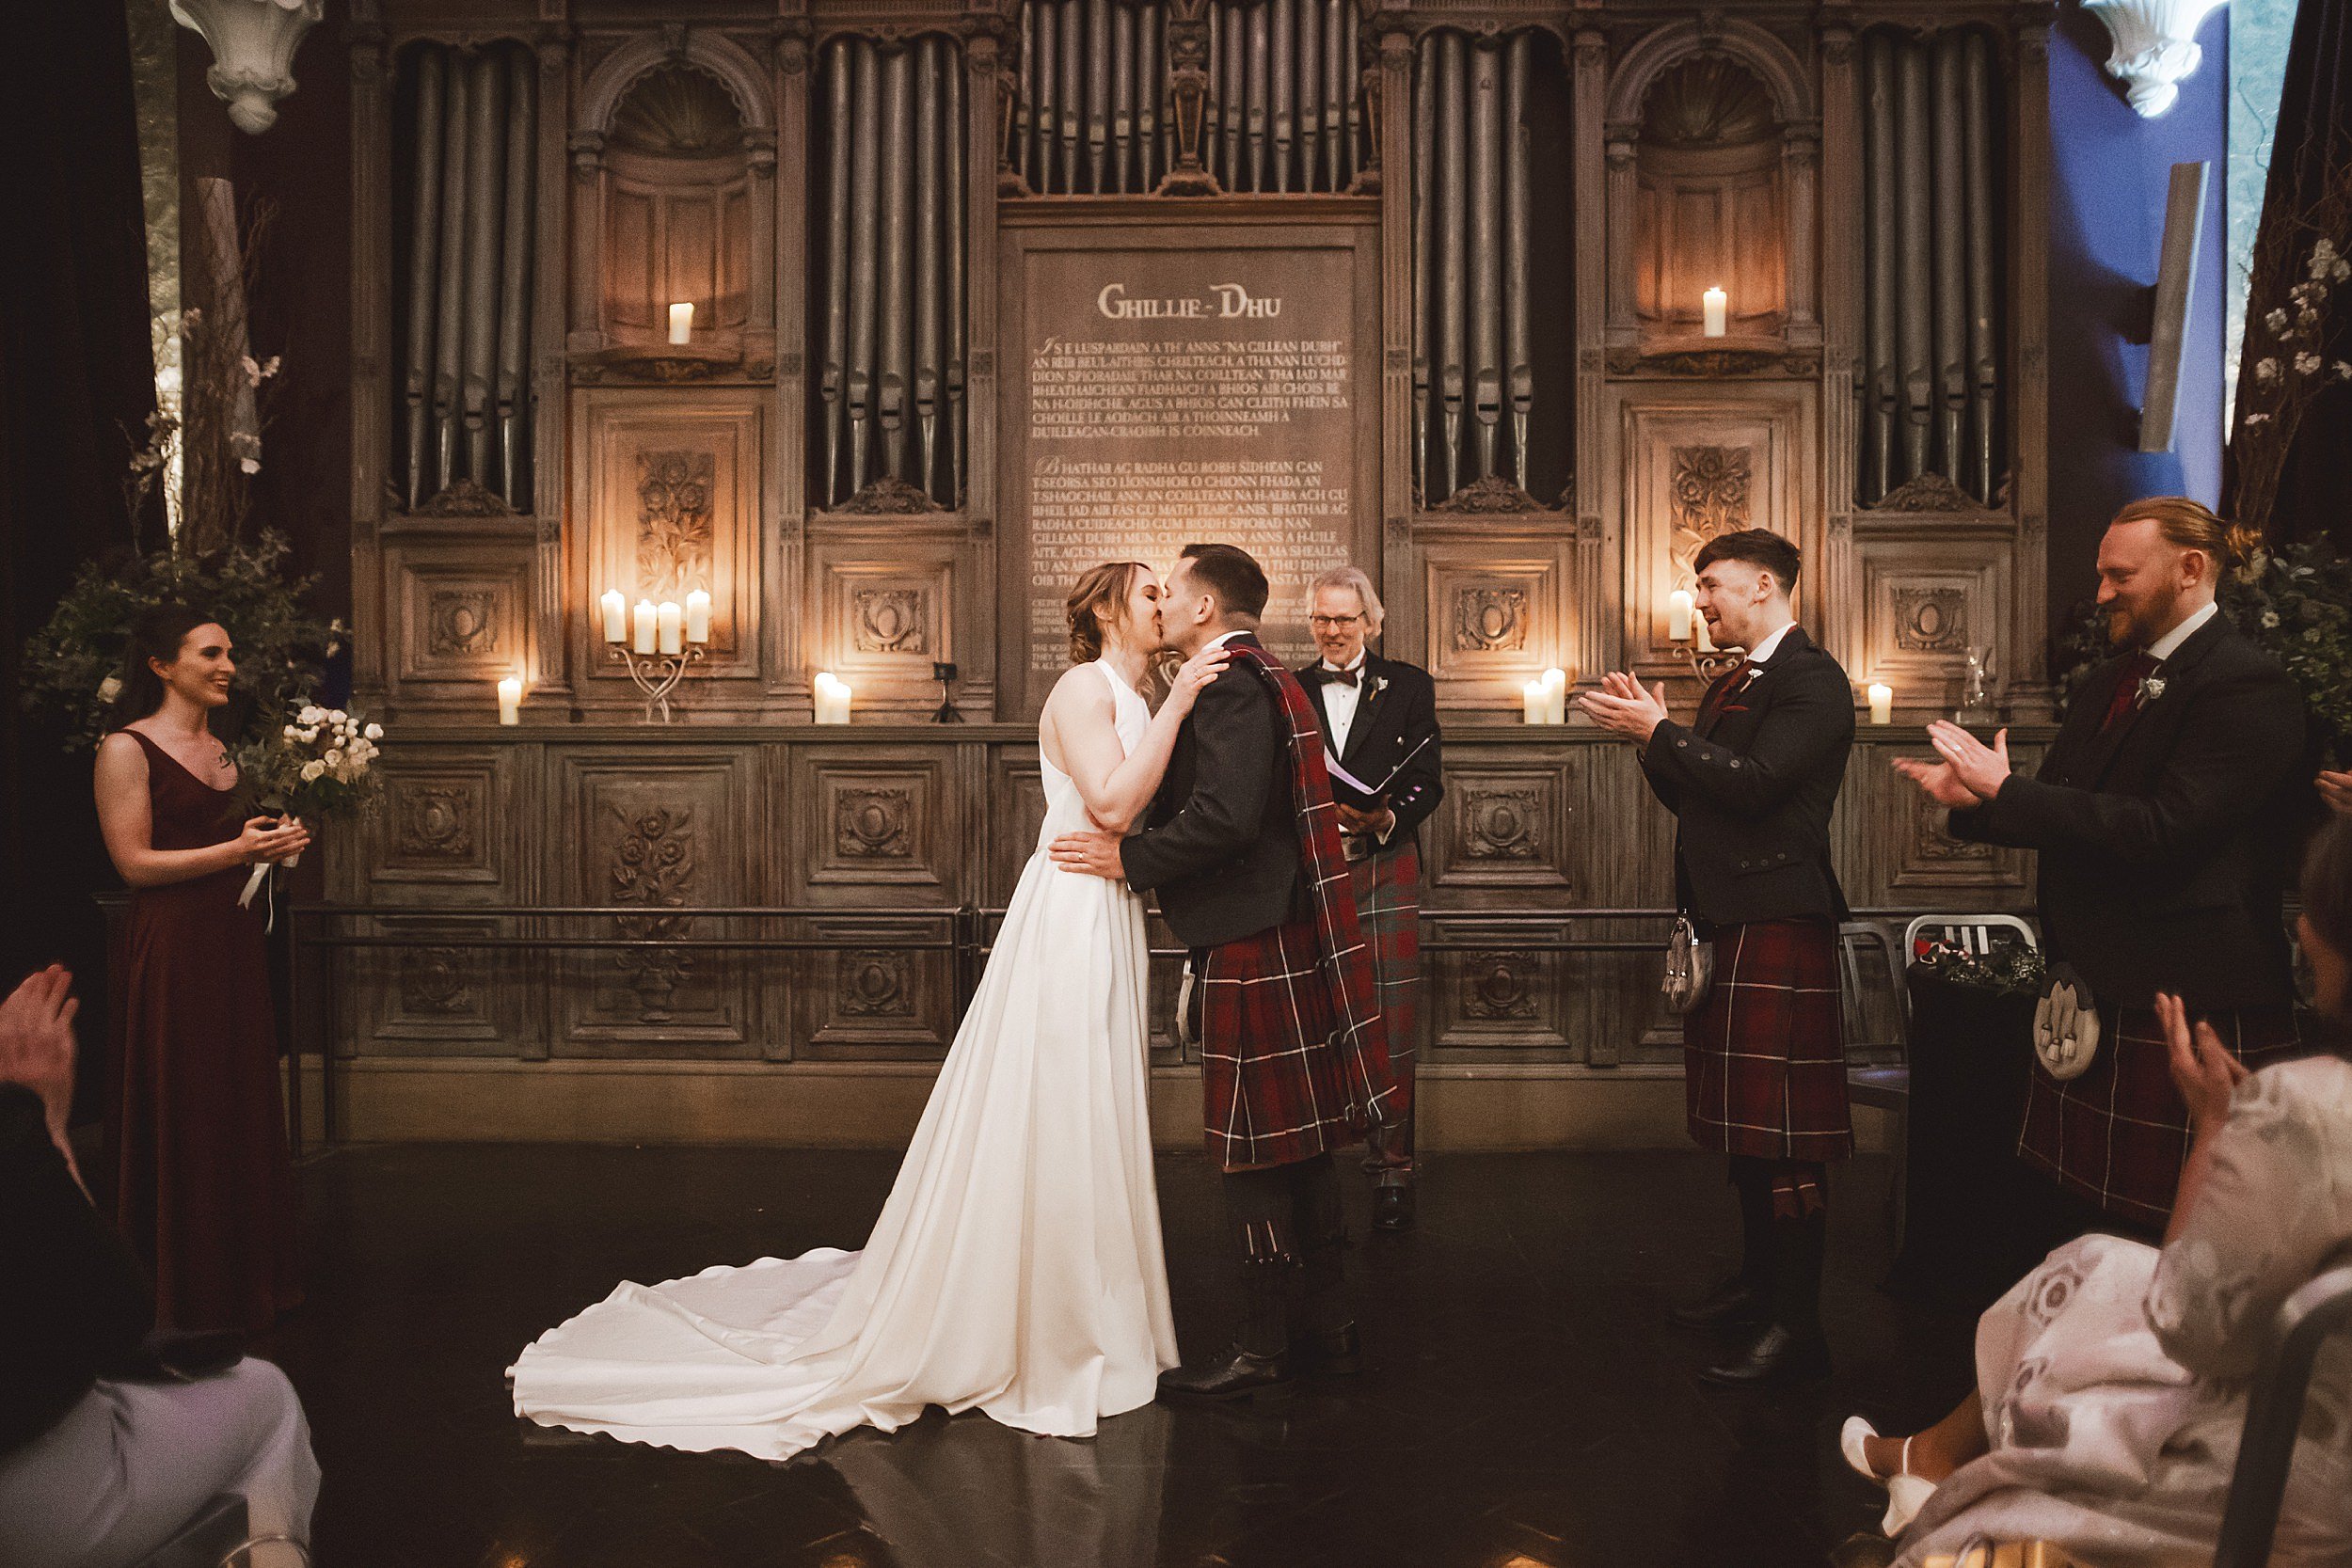 the bride and groom kiss during their wedding ceremony at unique wedding venue the ghillie dhu in scotland shot by documentary wedding photographer edinburgh